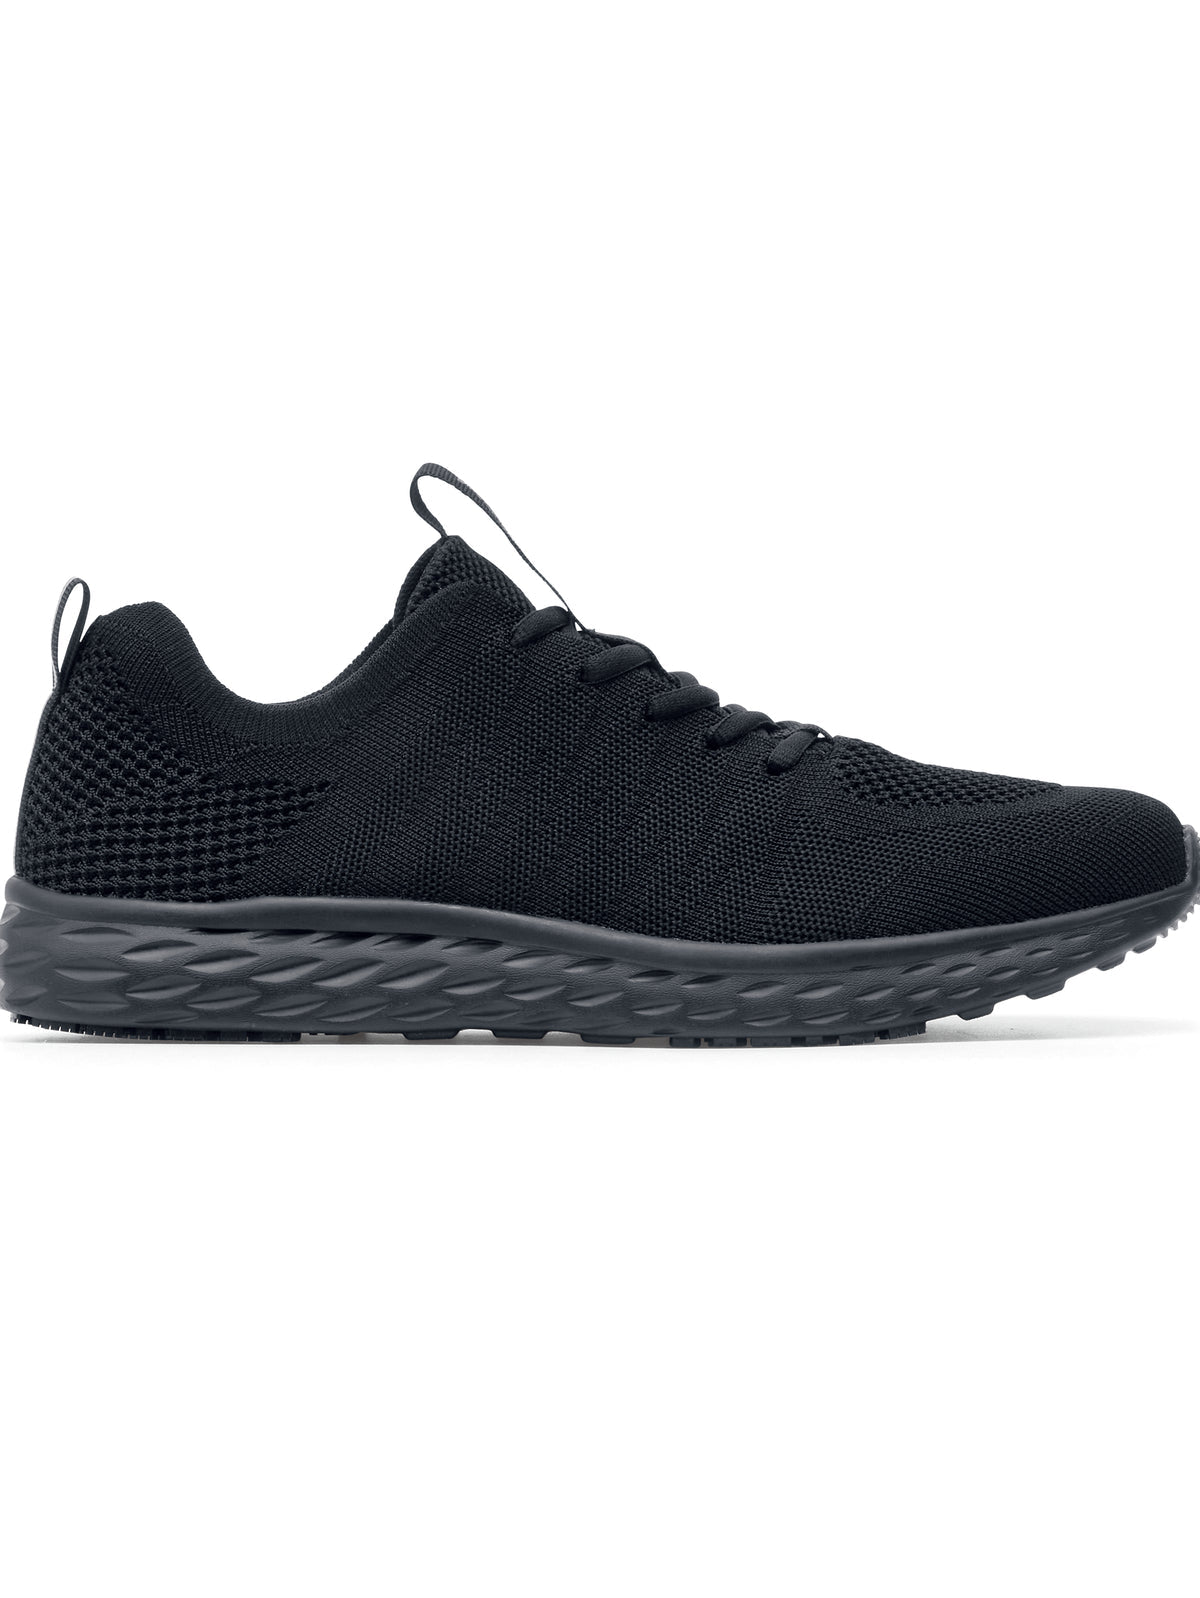 Men's Work Shoe Everlight Black by  Shoes For Crews.